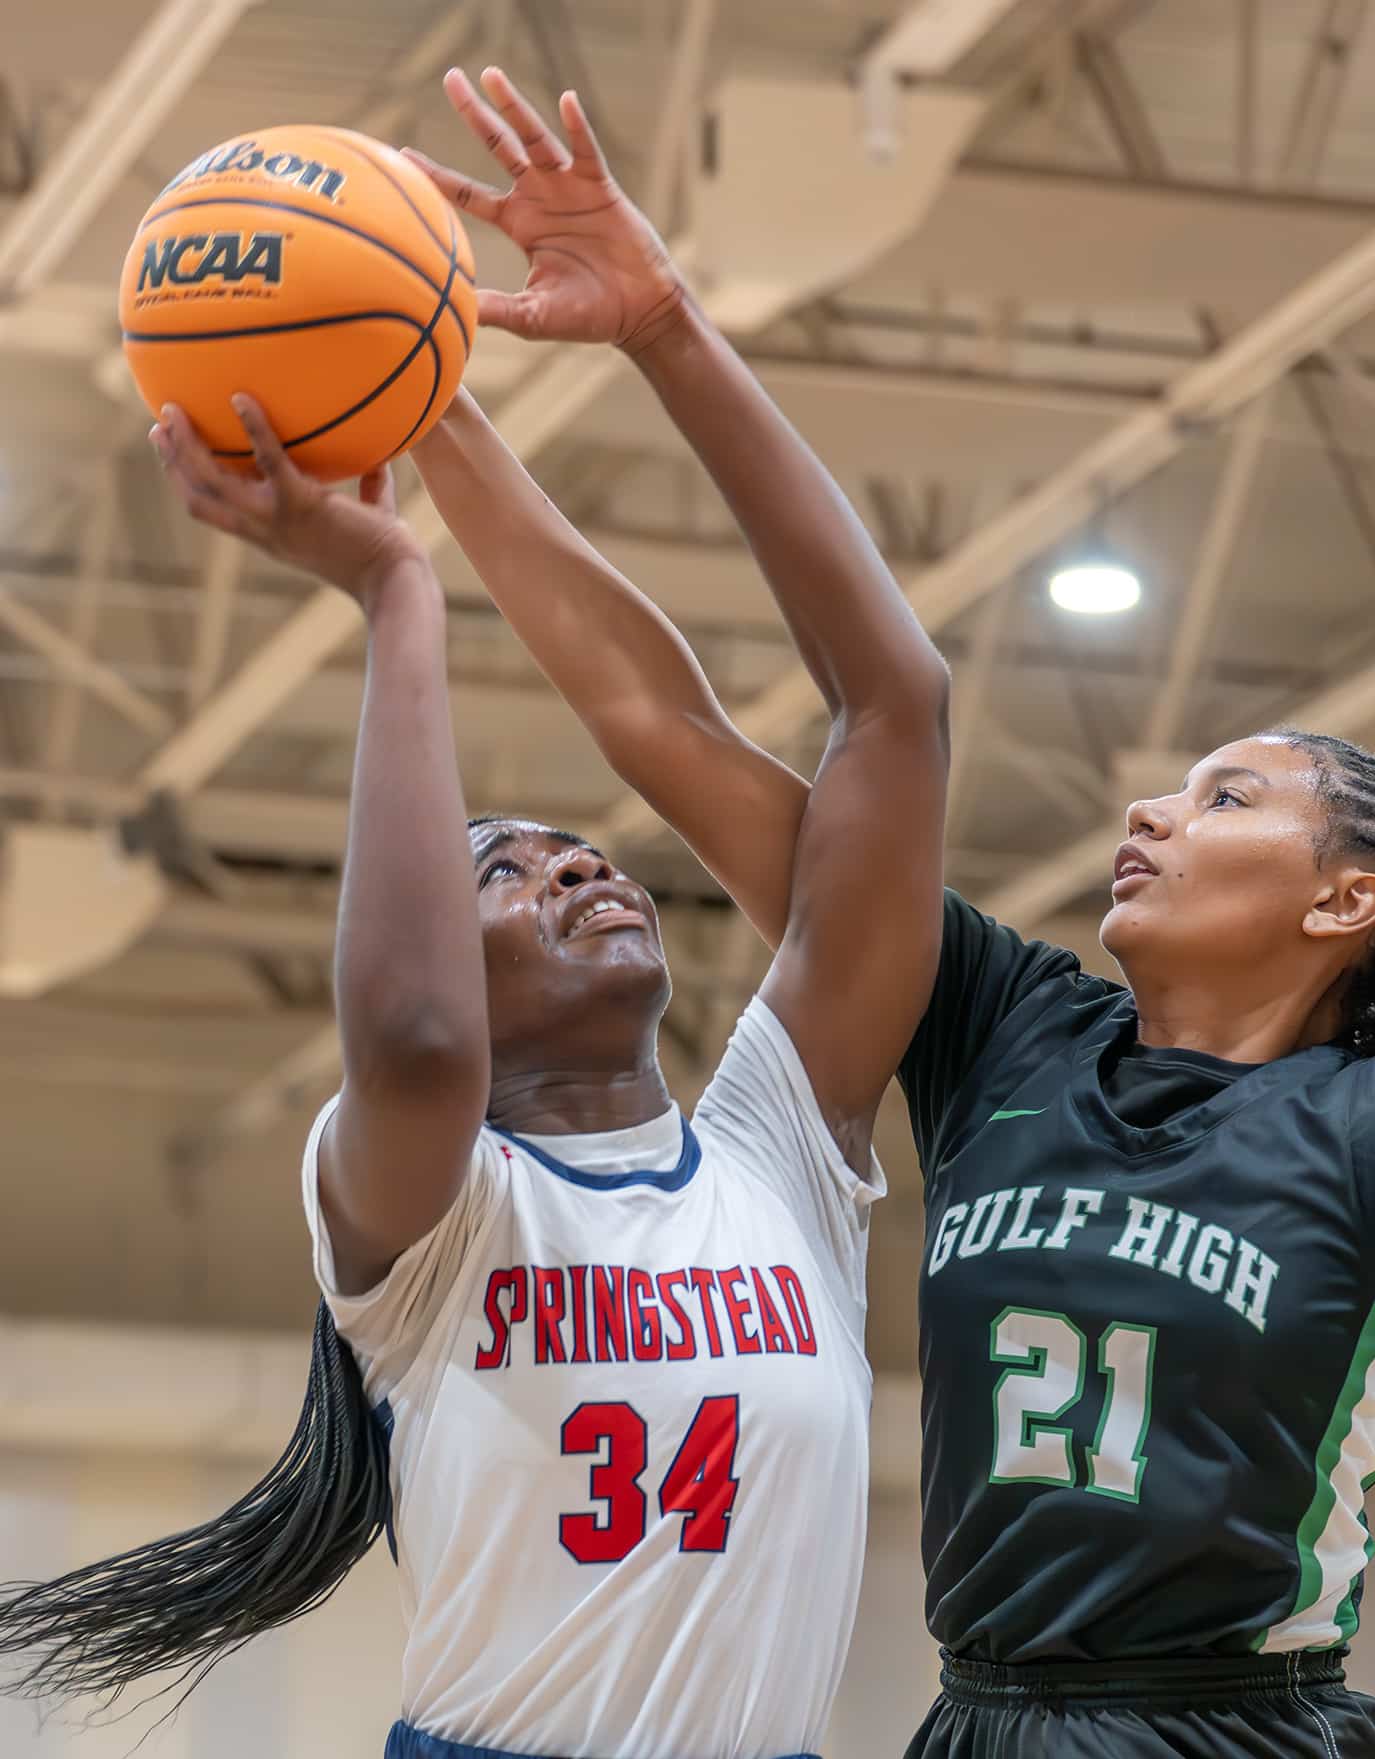 Springstead High, 34, Melanie Francis attempts a shot against Gulf High’s, 21, Ariana Rodriguez in the Springstead Holiday Tournament.[Credit: Joe DiCristofalo]